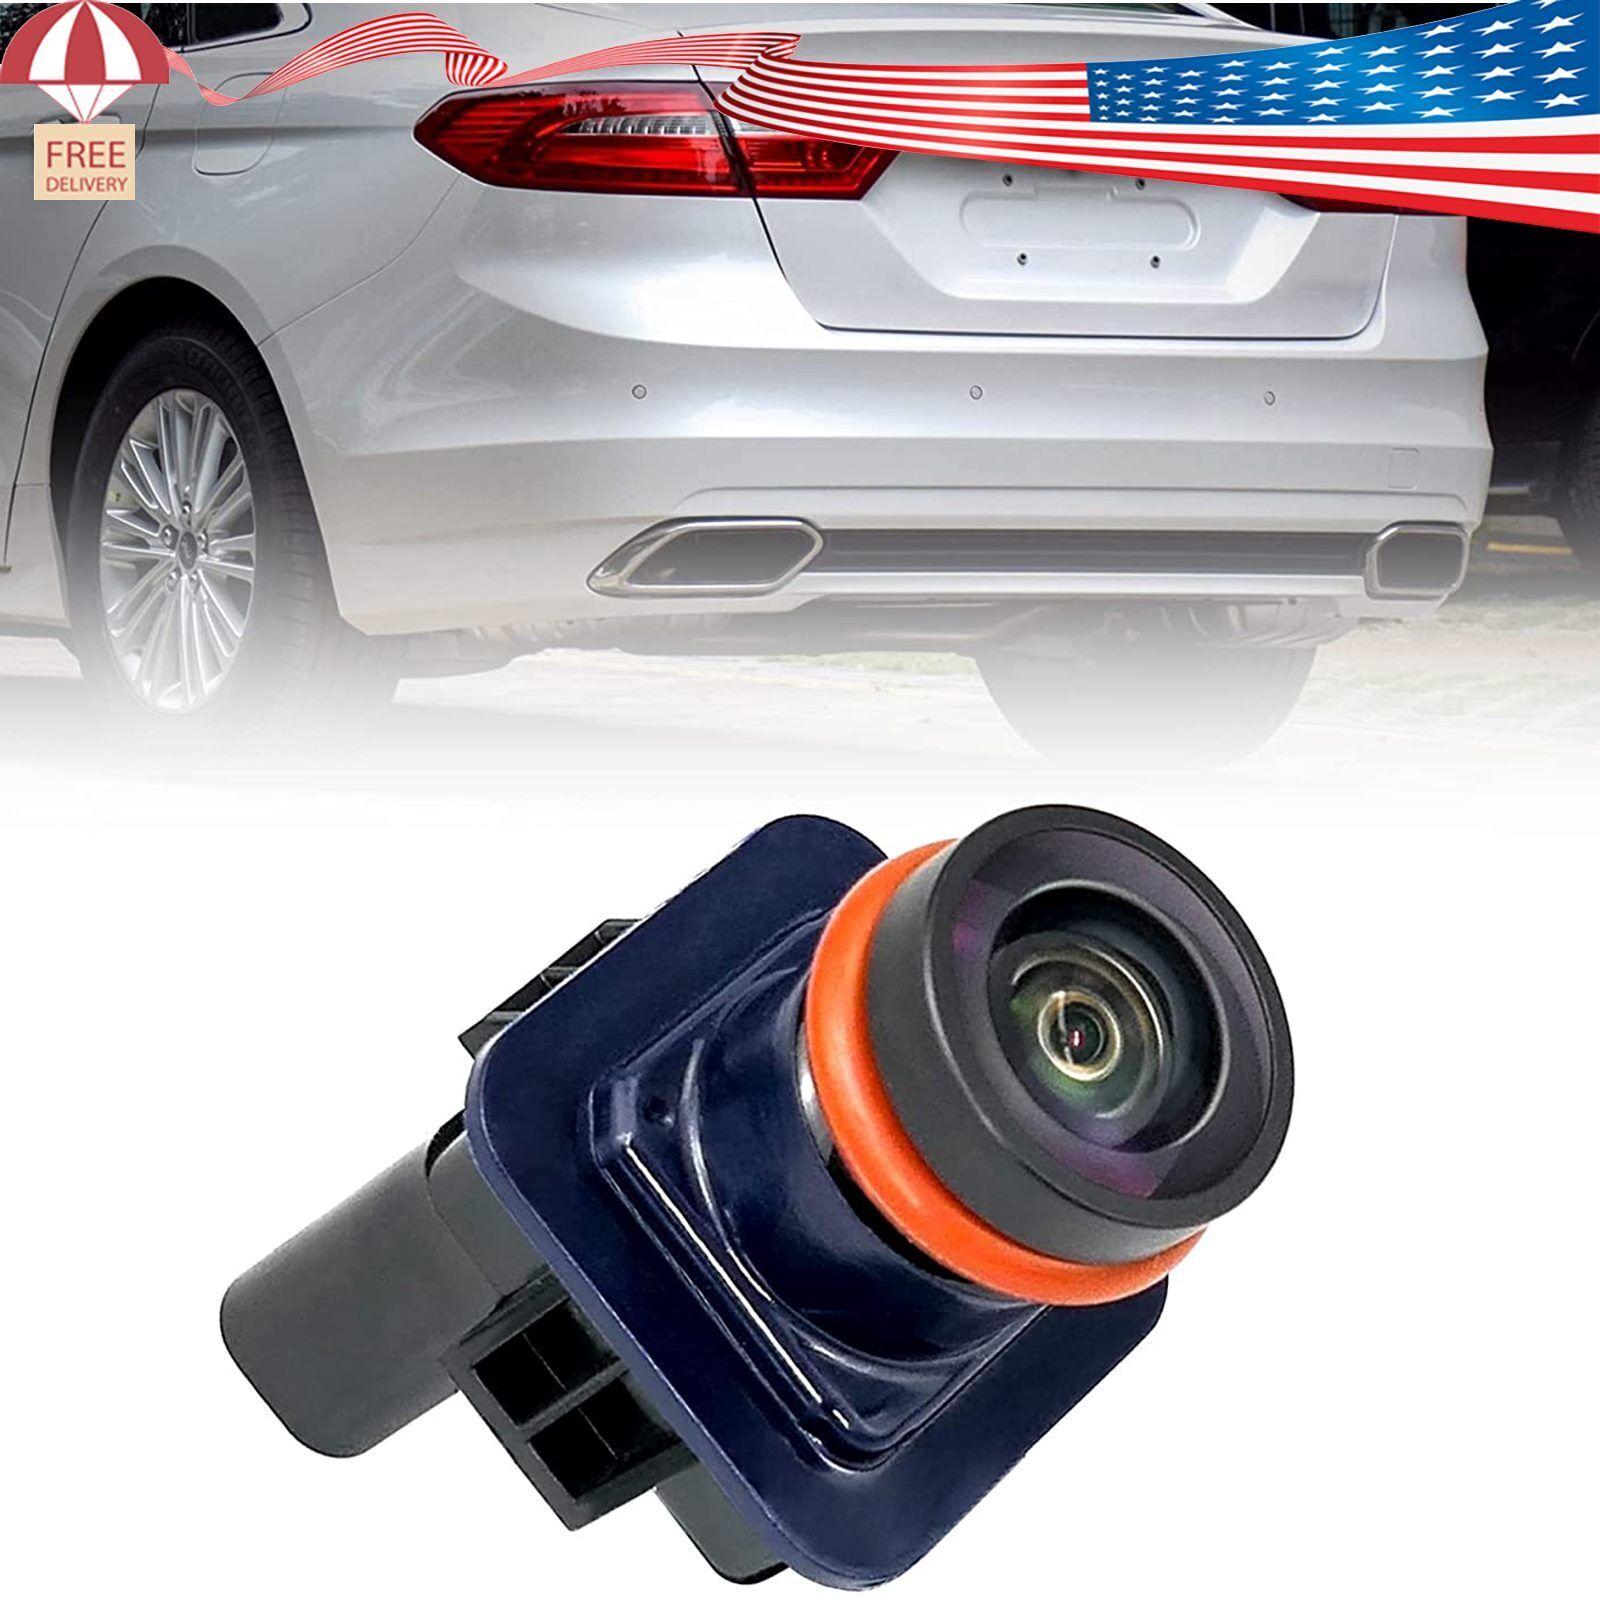 New Rear View Back Up Camera For Ford Taurus 2013-2019 EG1Z19G490A Camera